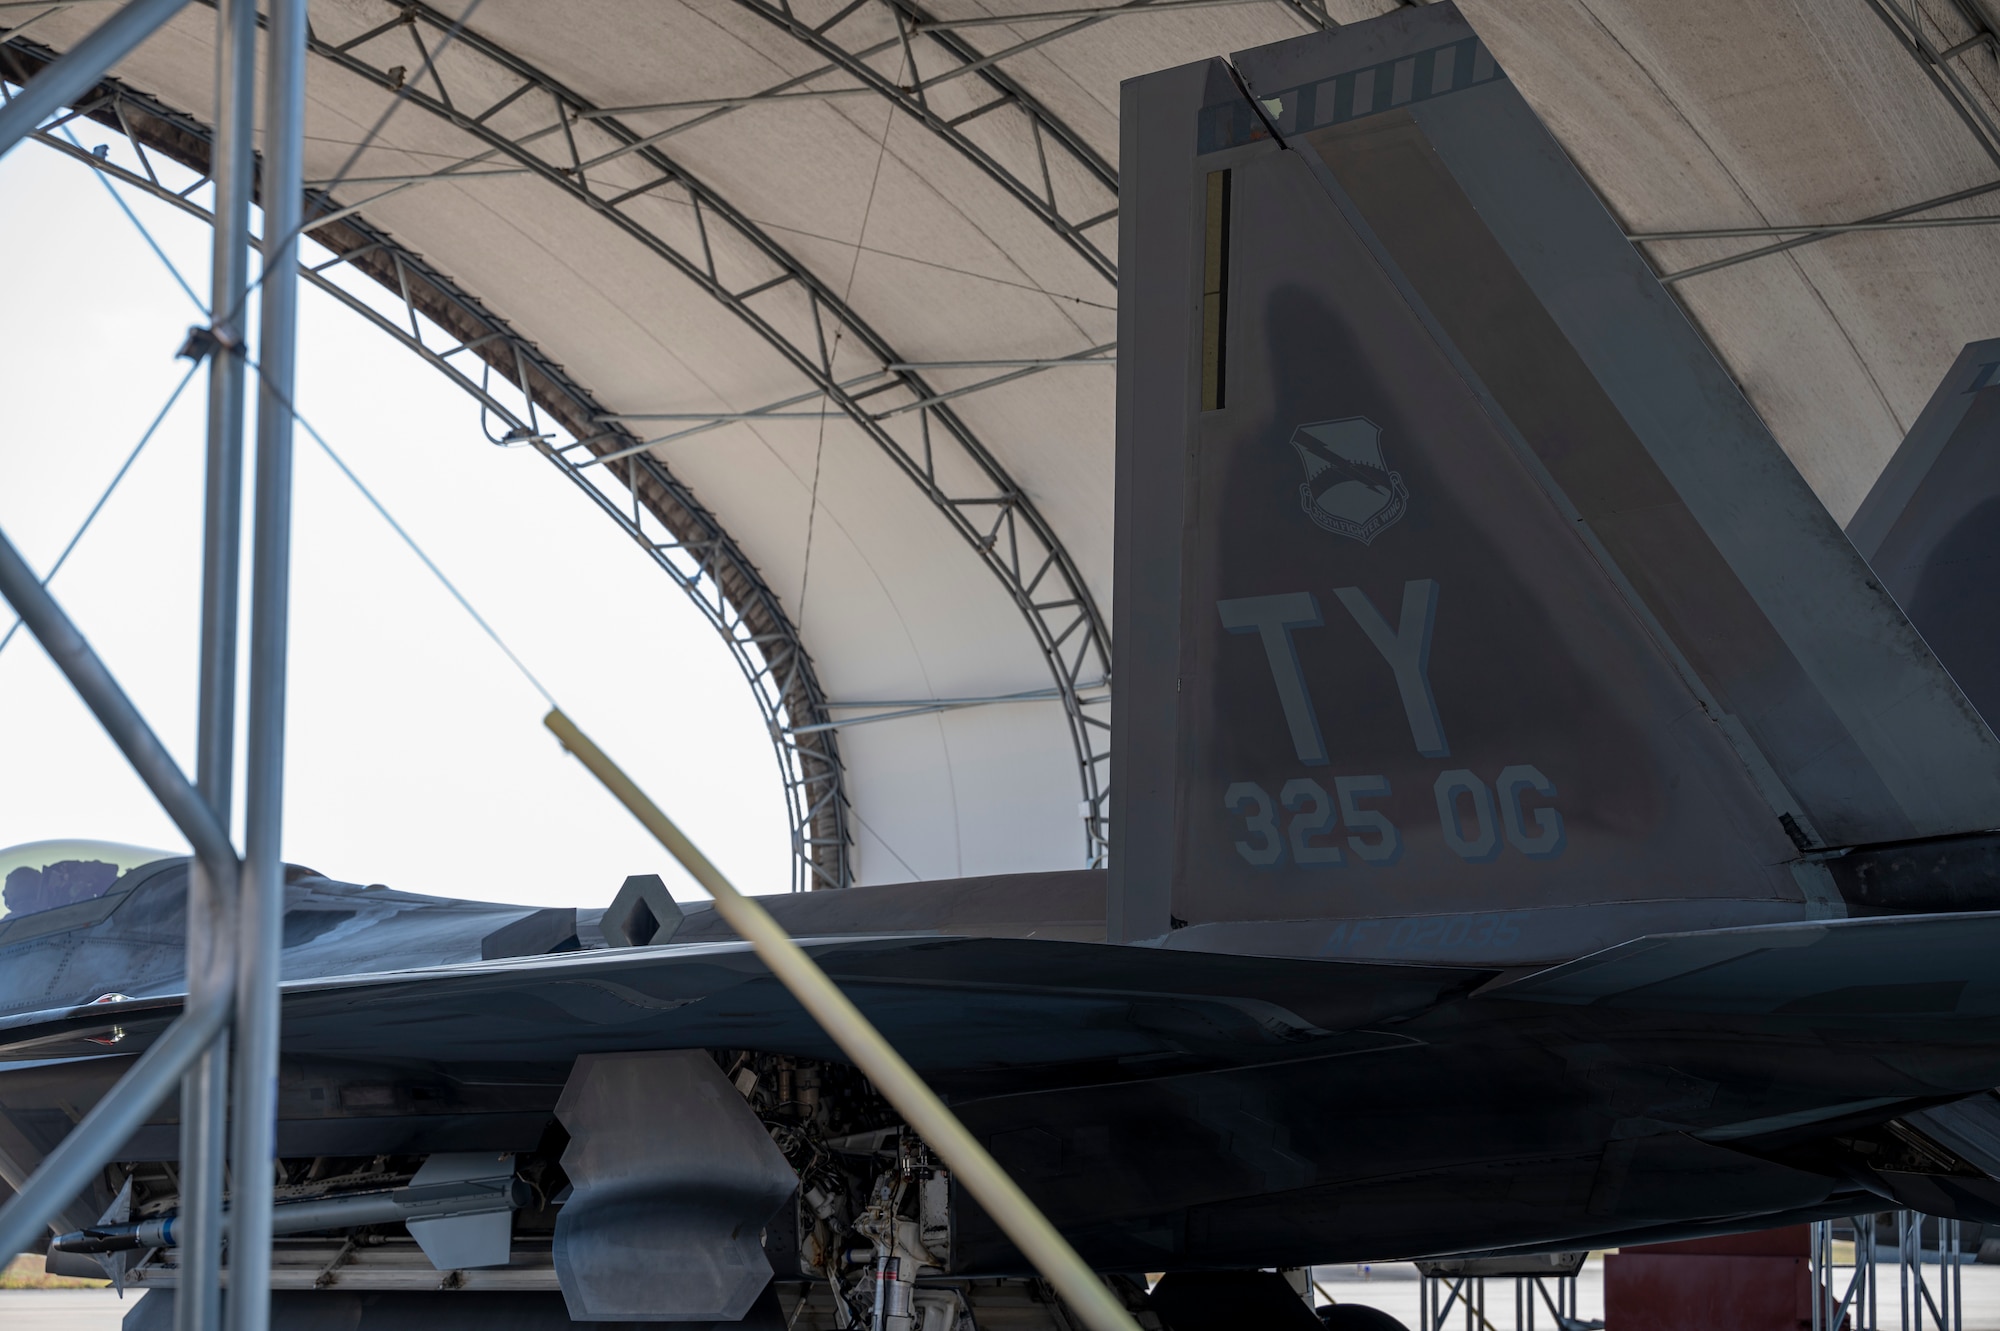 The tail flash of an F-22 Raptor assigned to Tyndall Air Force Base